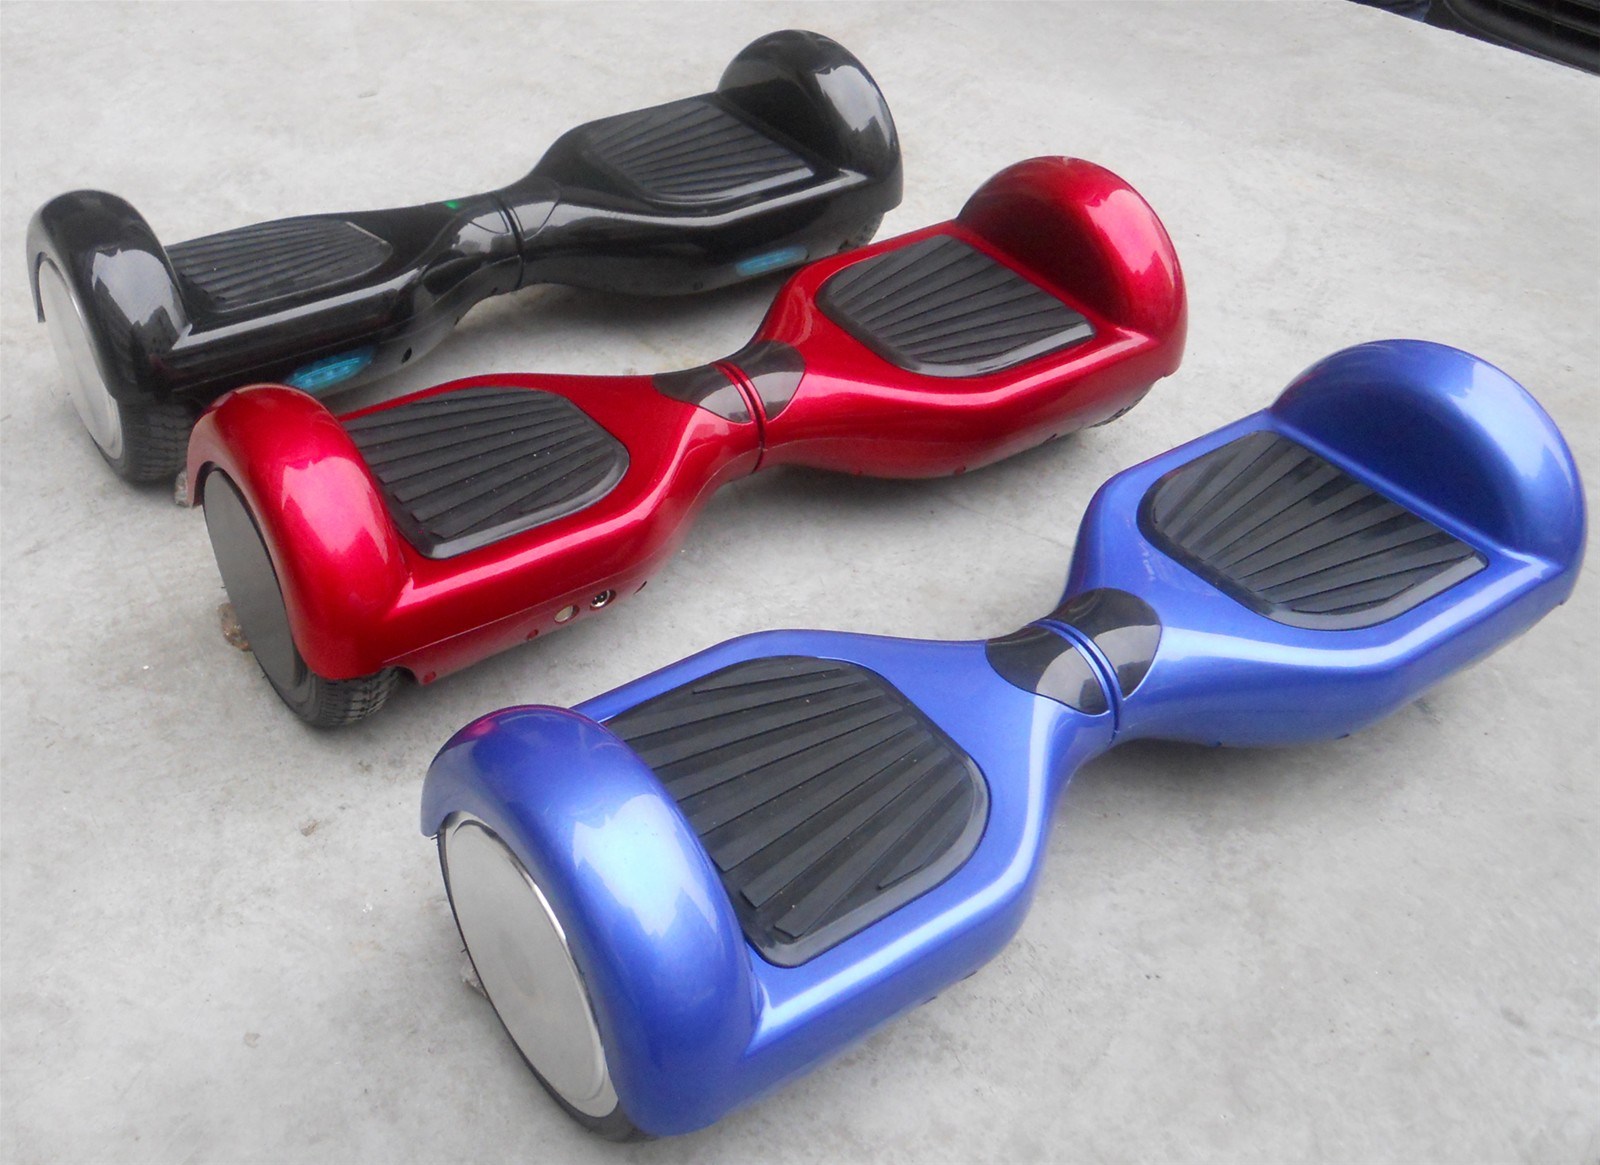 Kids Mini Electric Scooters in Different Colors